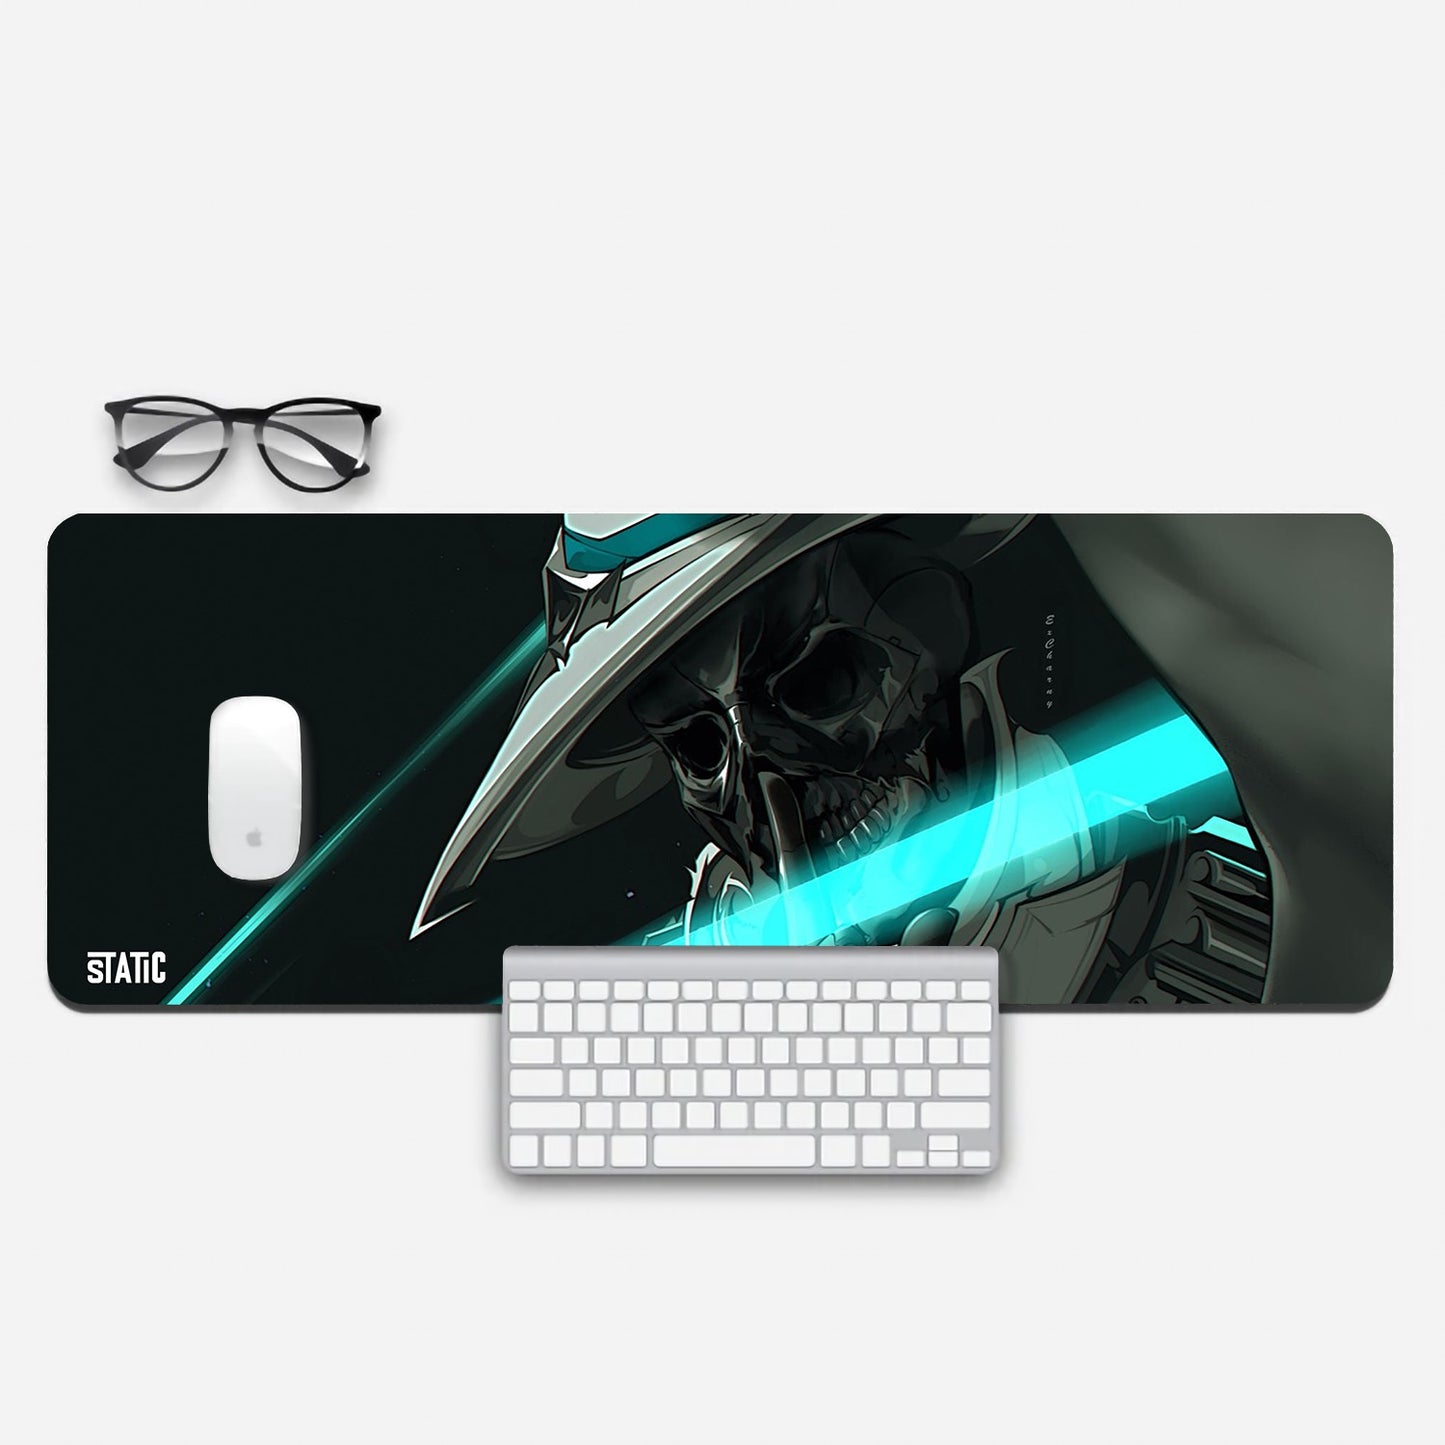 Level up your gaming with our Extended Gaming Mouse Pad showcasing Cipher from Valorant. This striking design features Cipher's face set against a sea green backdrop, creating a visually stunning gaming experience. Sized at 800x300mm, it offers precision and comfort. Built for durability, it's perfect for all gamers. Elevate your gameplay and style with this premium mouse pad. Get yours now!